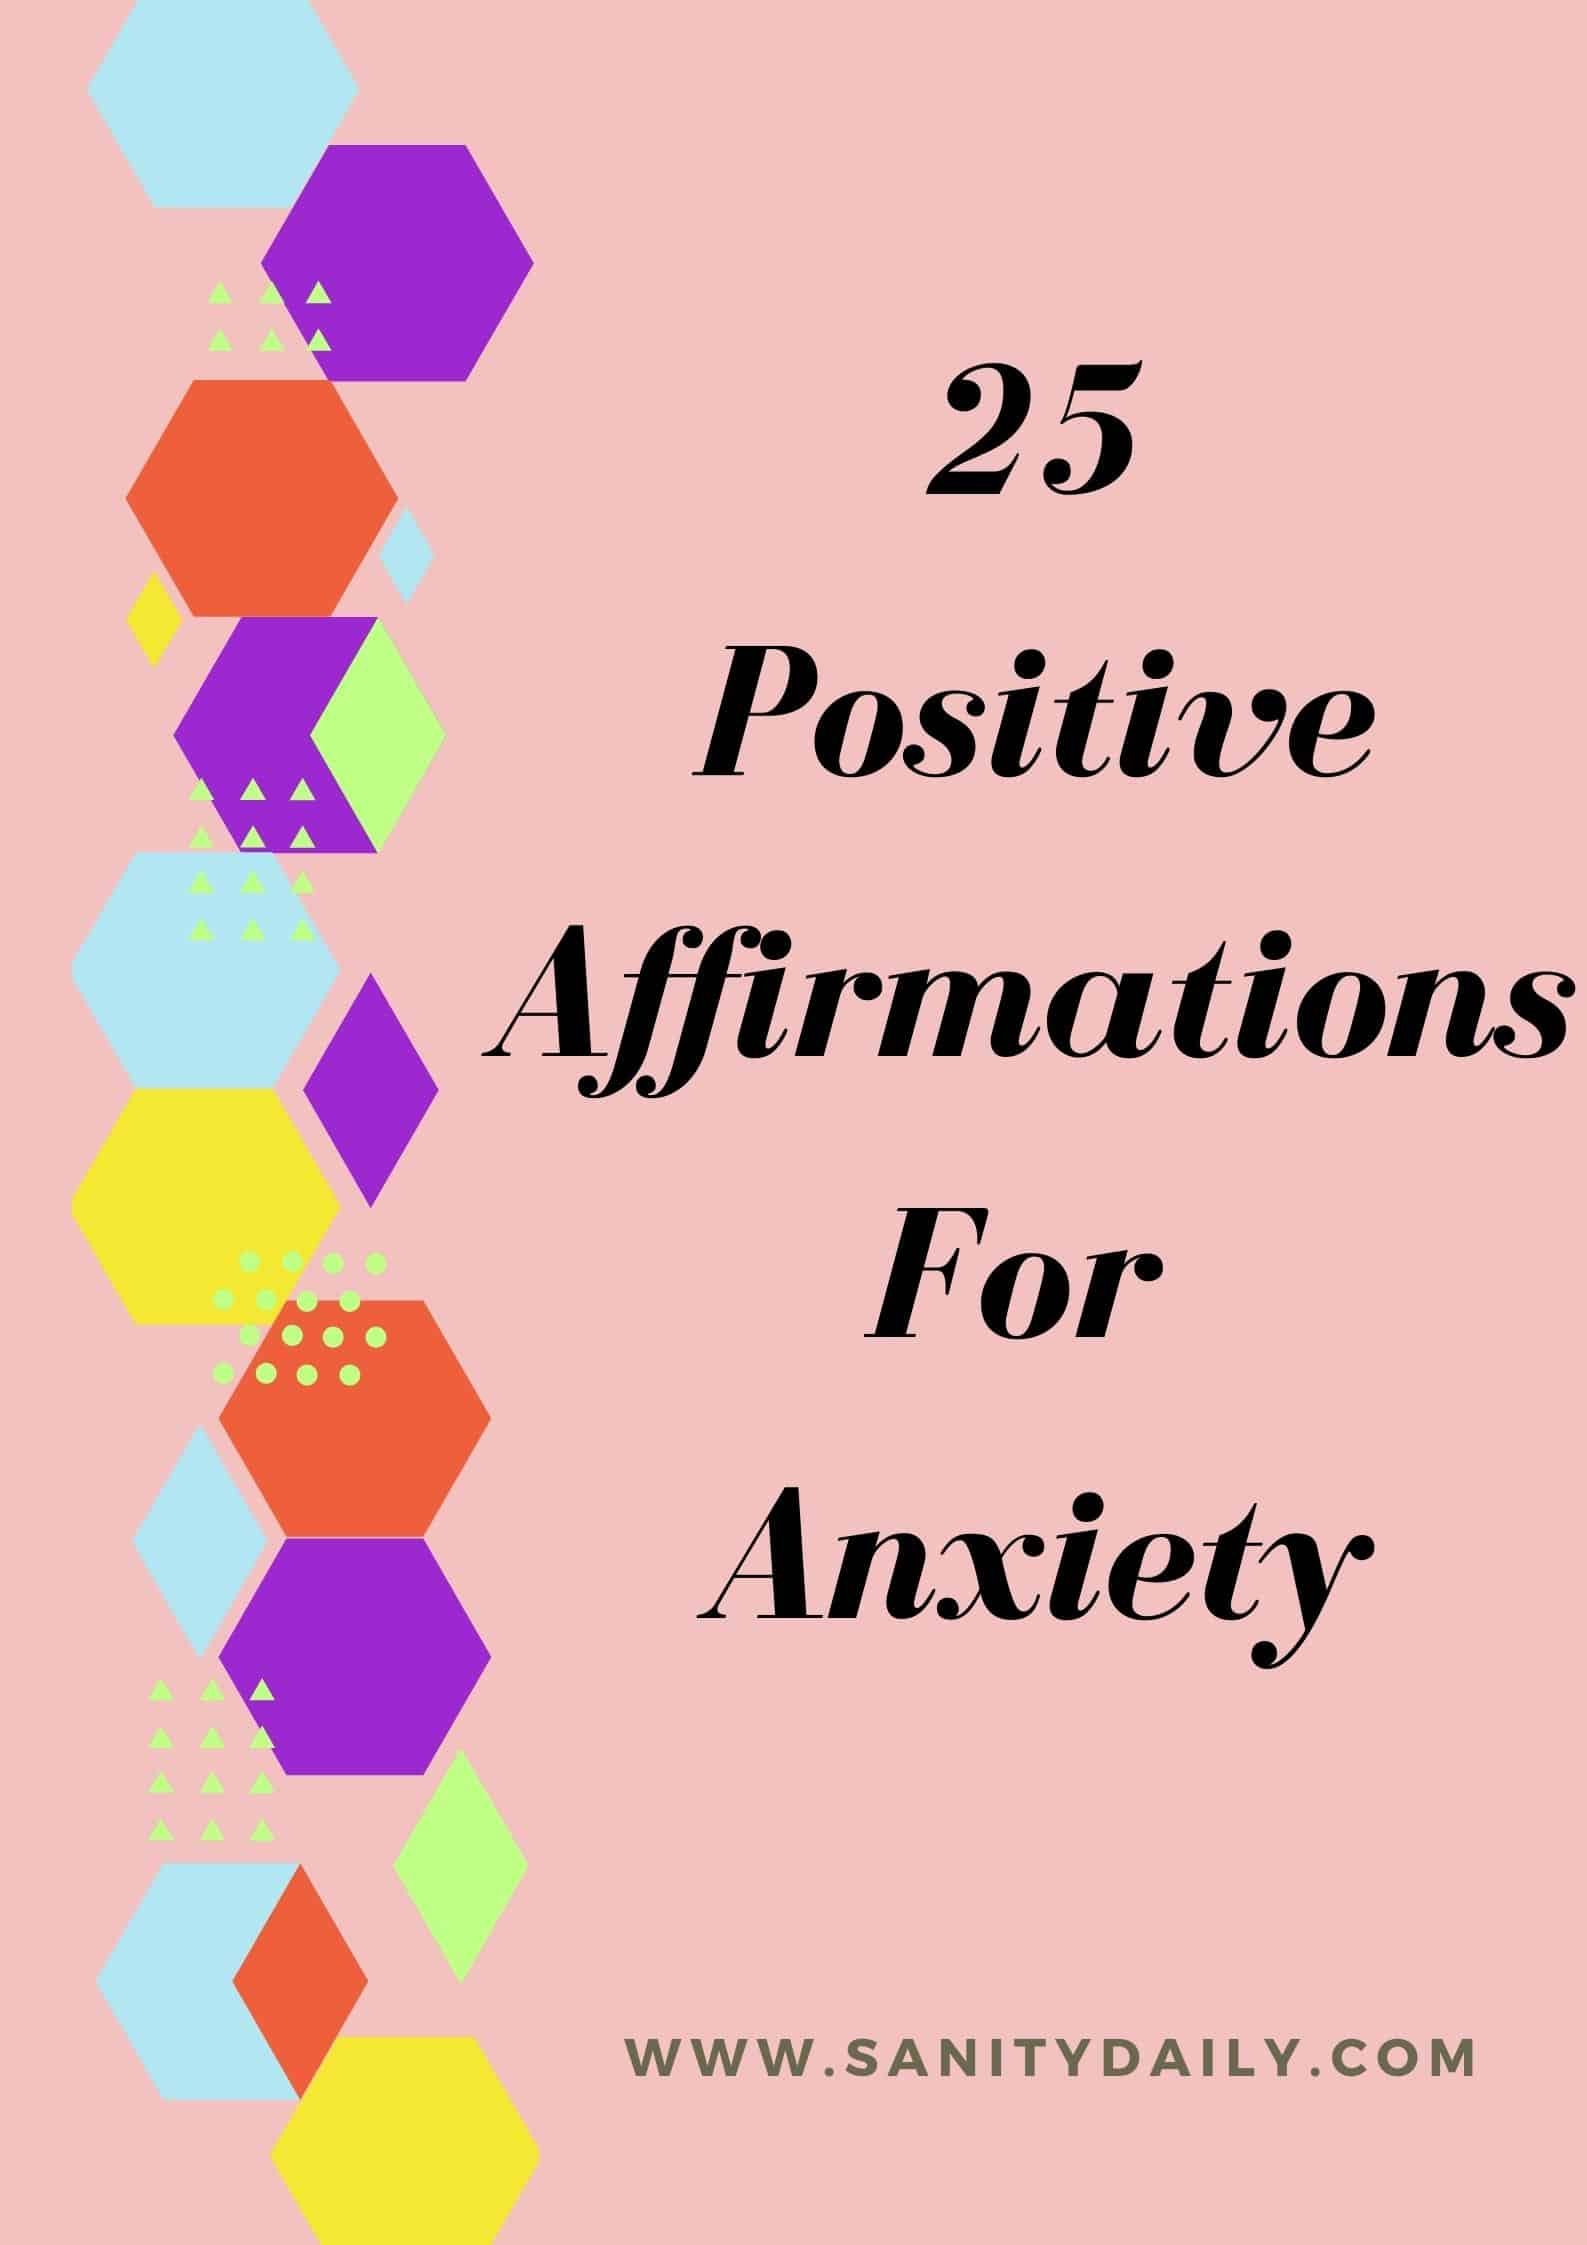 Positive Affirmations For Anxiety